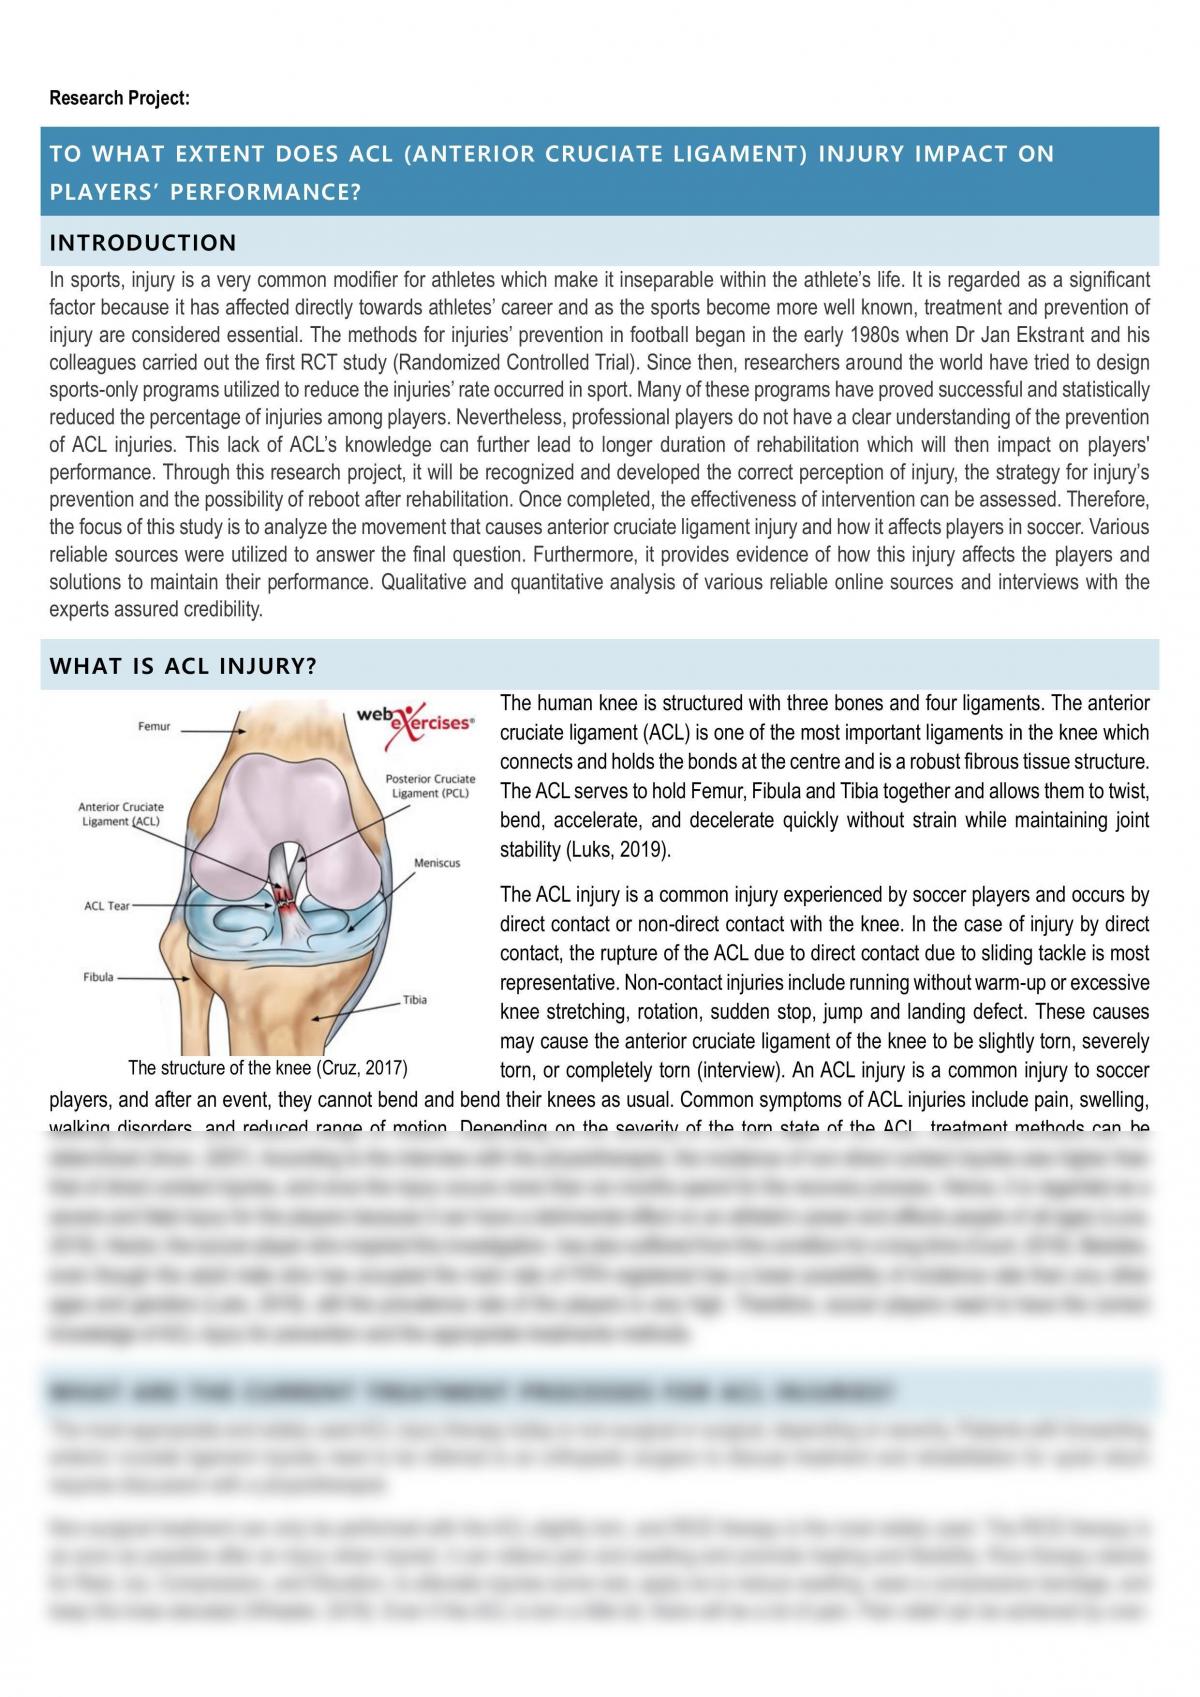 To What Extent Does ACL Injury Impact On Players' Performance? - Page 1